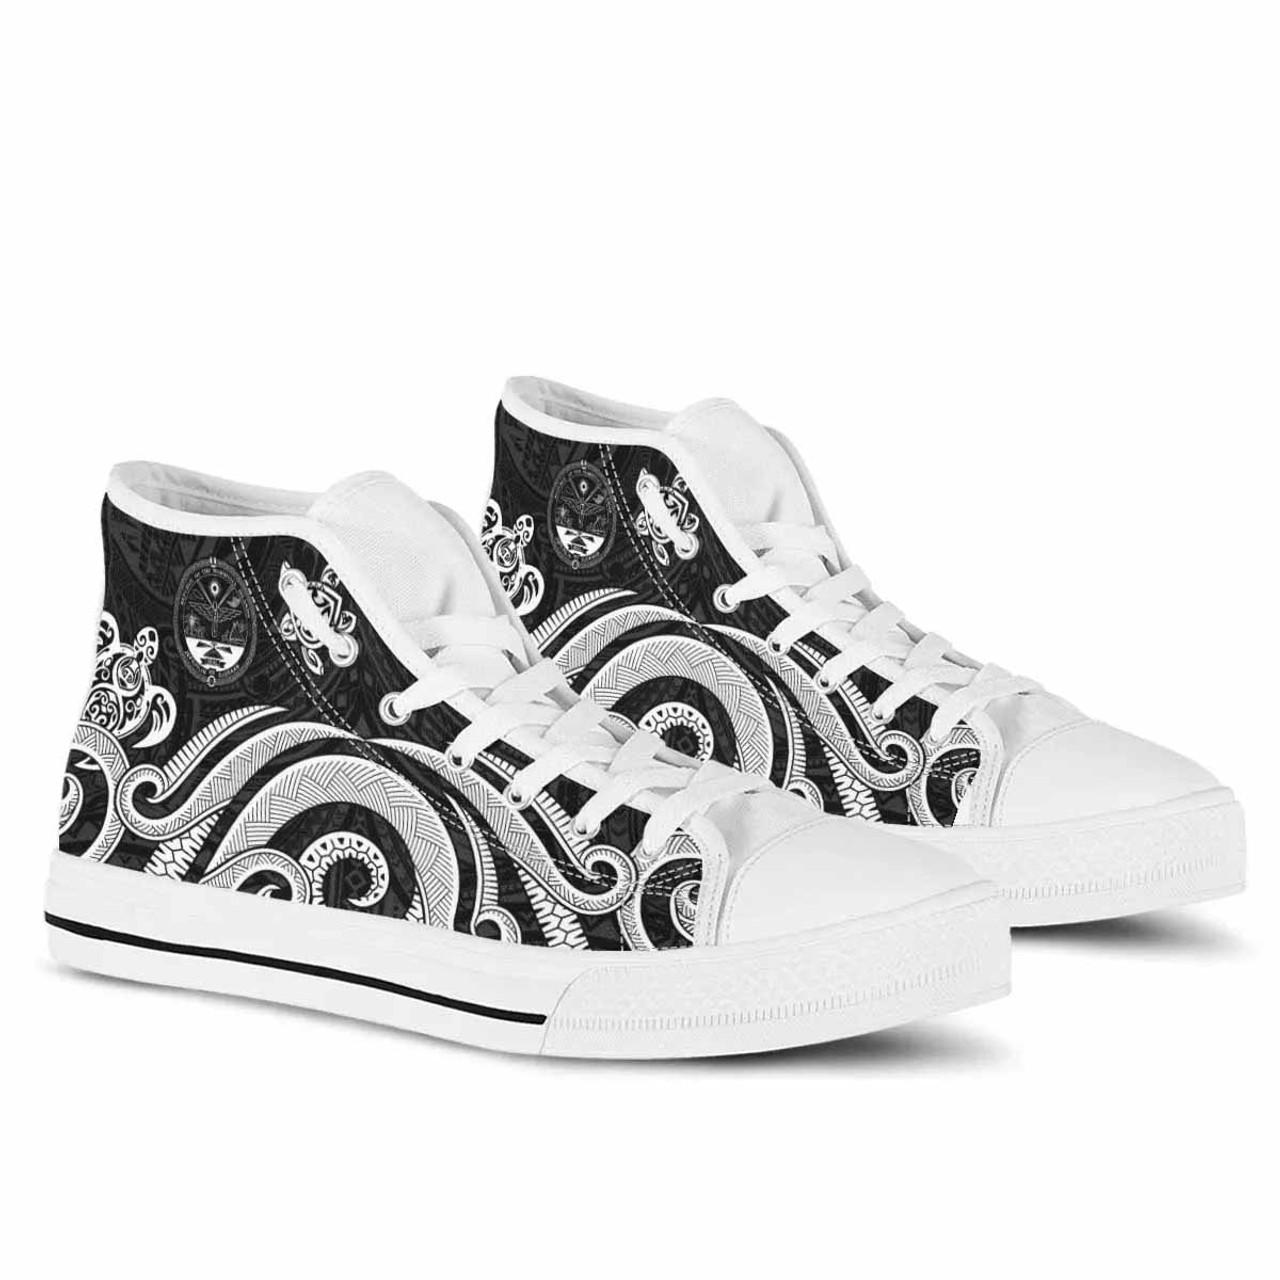 Marshall Islands High Top Shoes - White Tentacle Turtle Crest  8